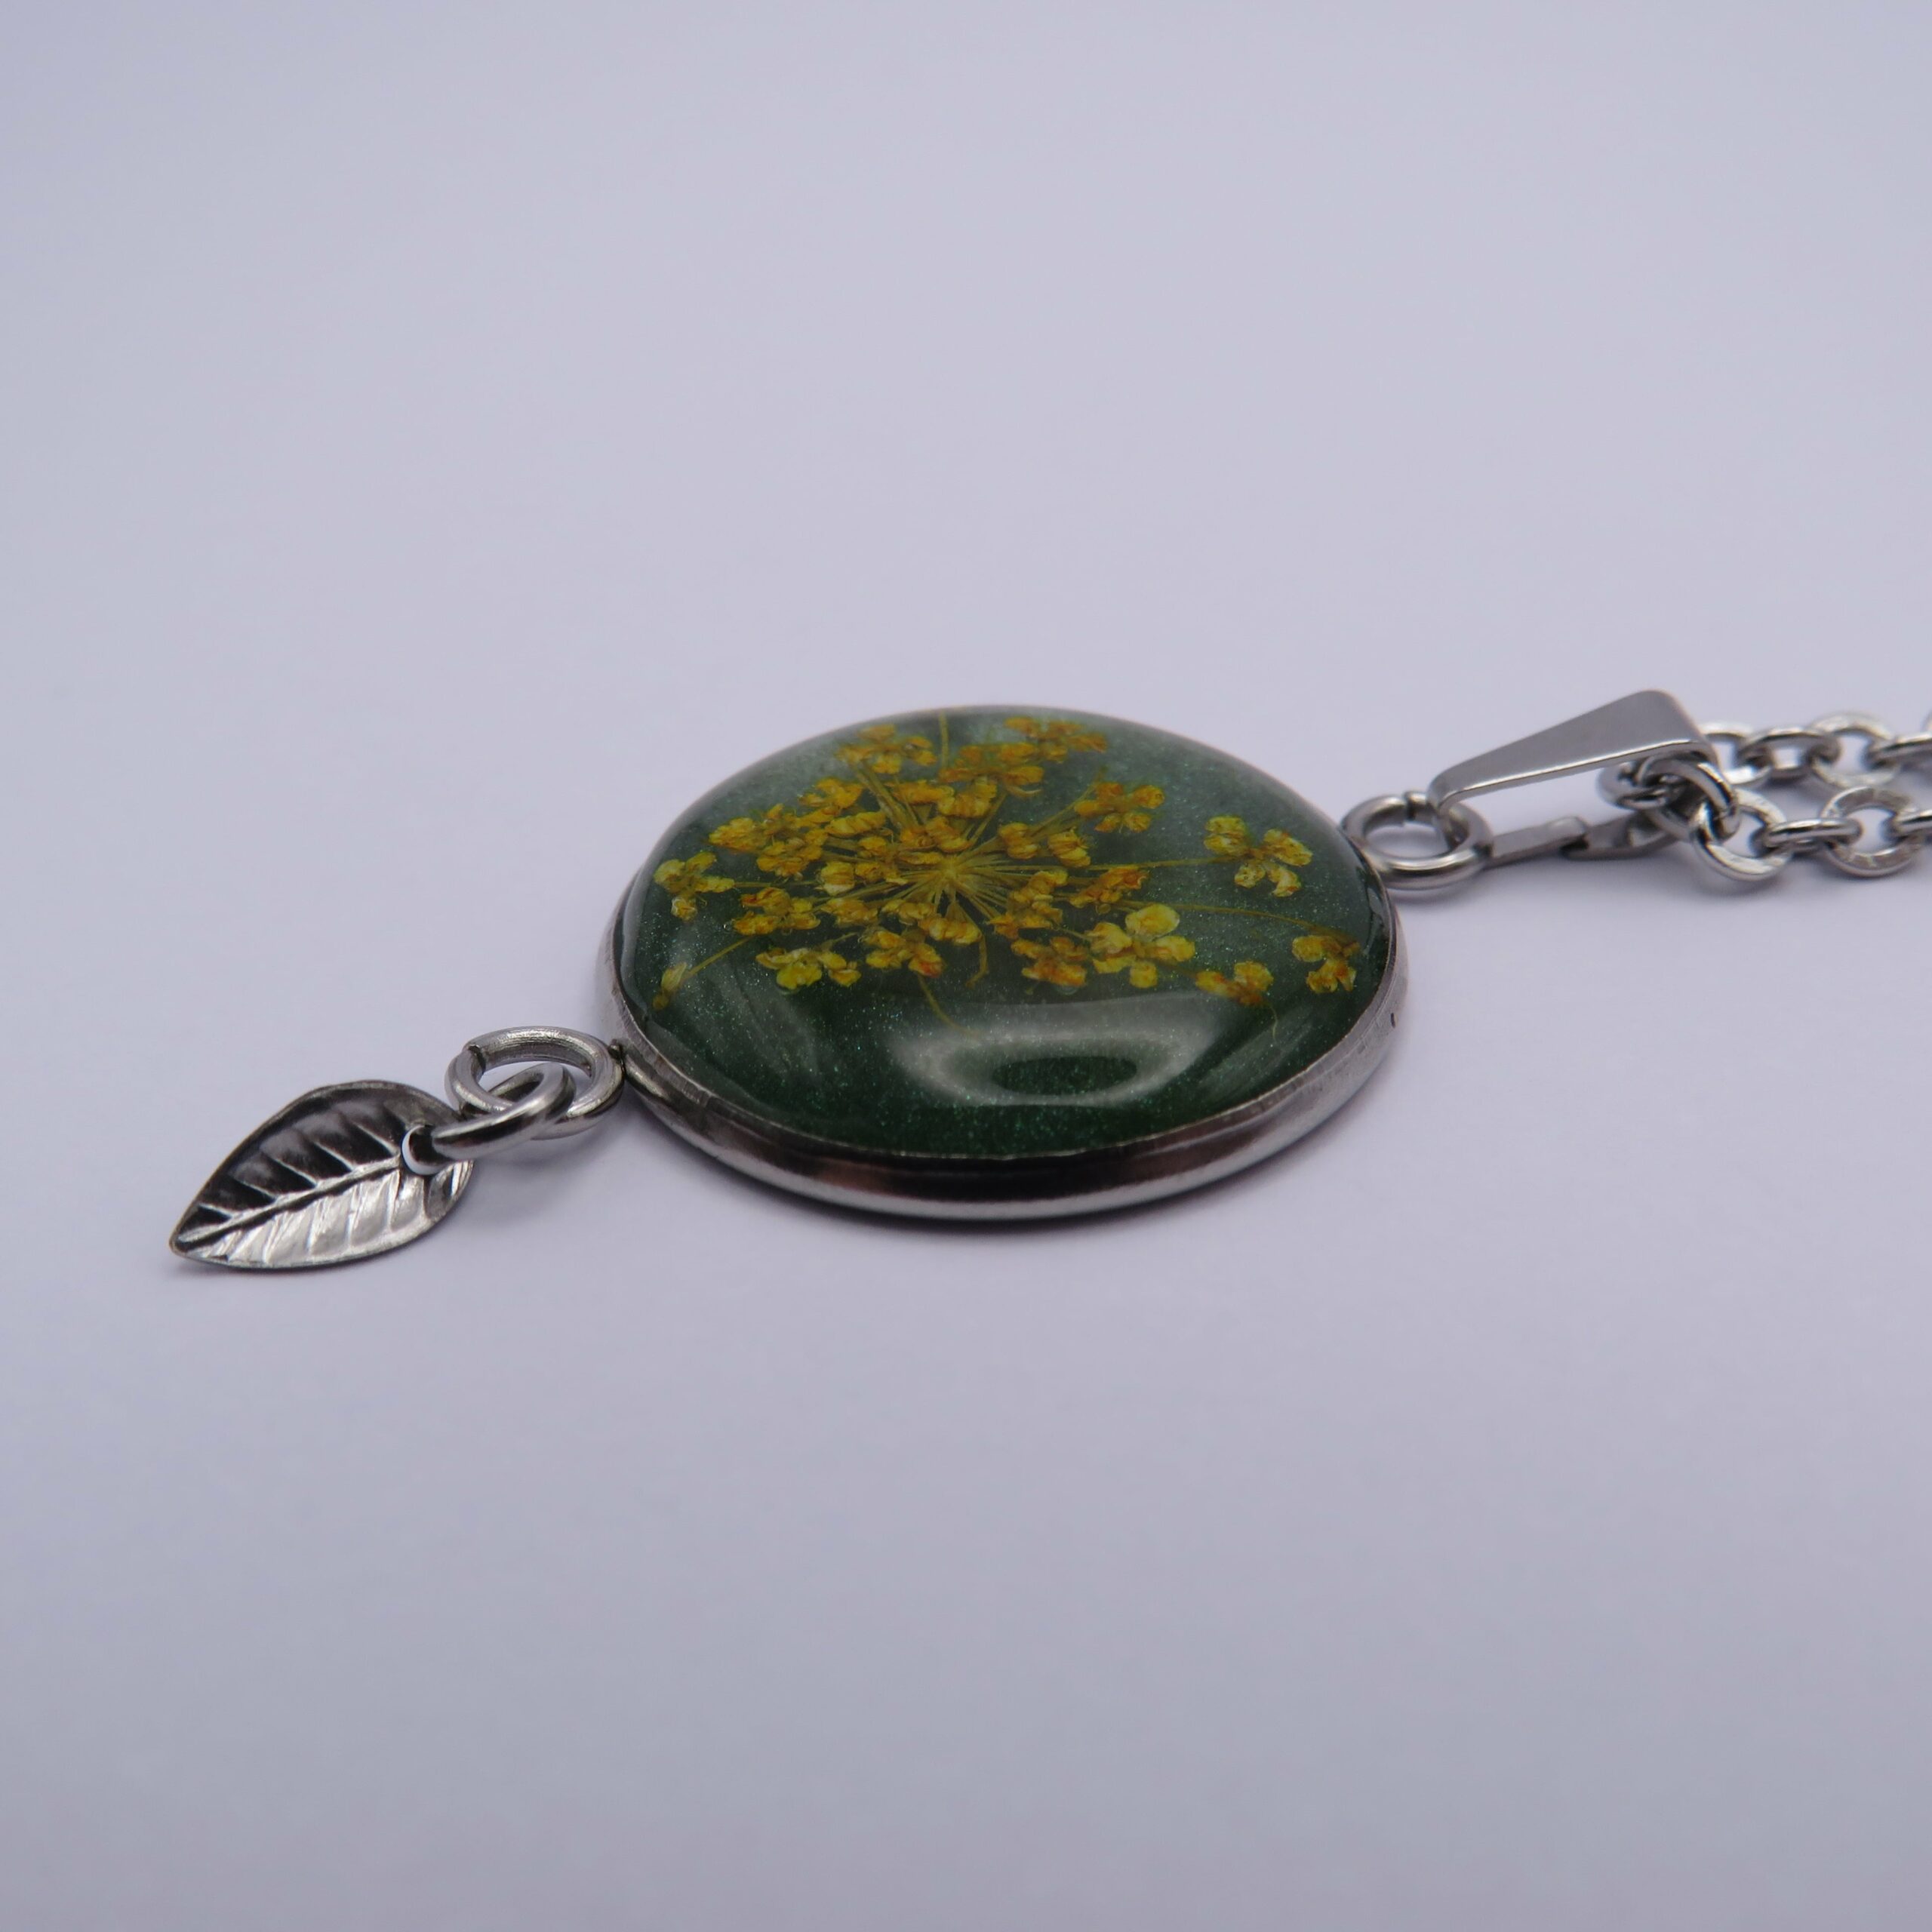 Stainless Steel Yellow Flower Green Cabochon Leaf Pendant Necklace